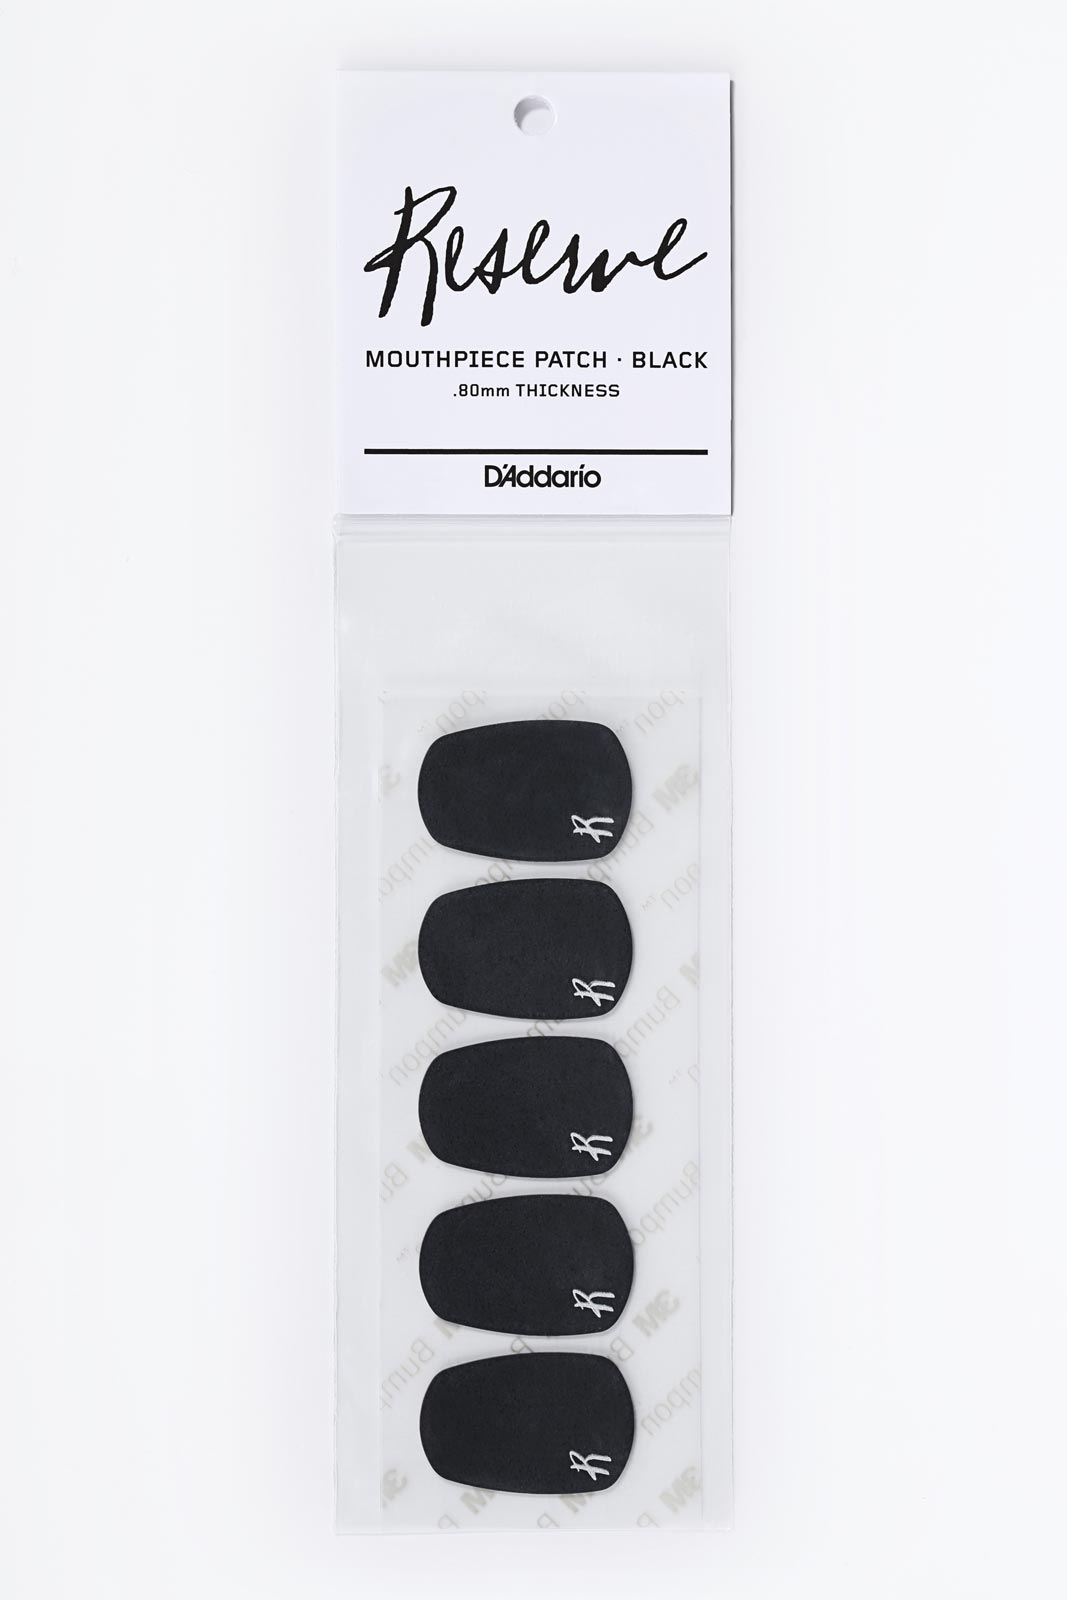 D'ADDARIO - RICO RESERVE MOUTHPIECE PATCH BLACK 5 PACK